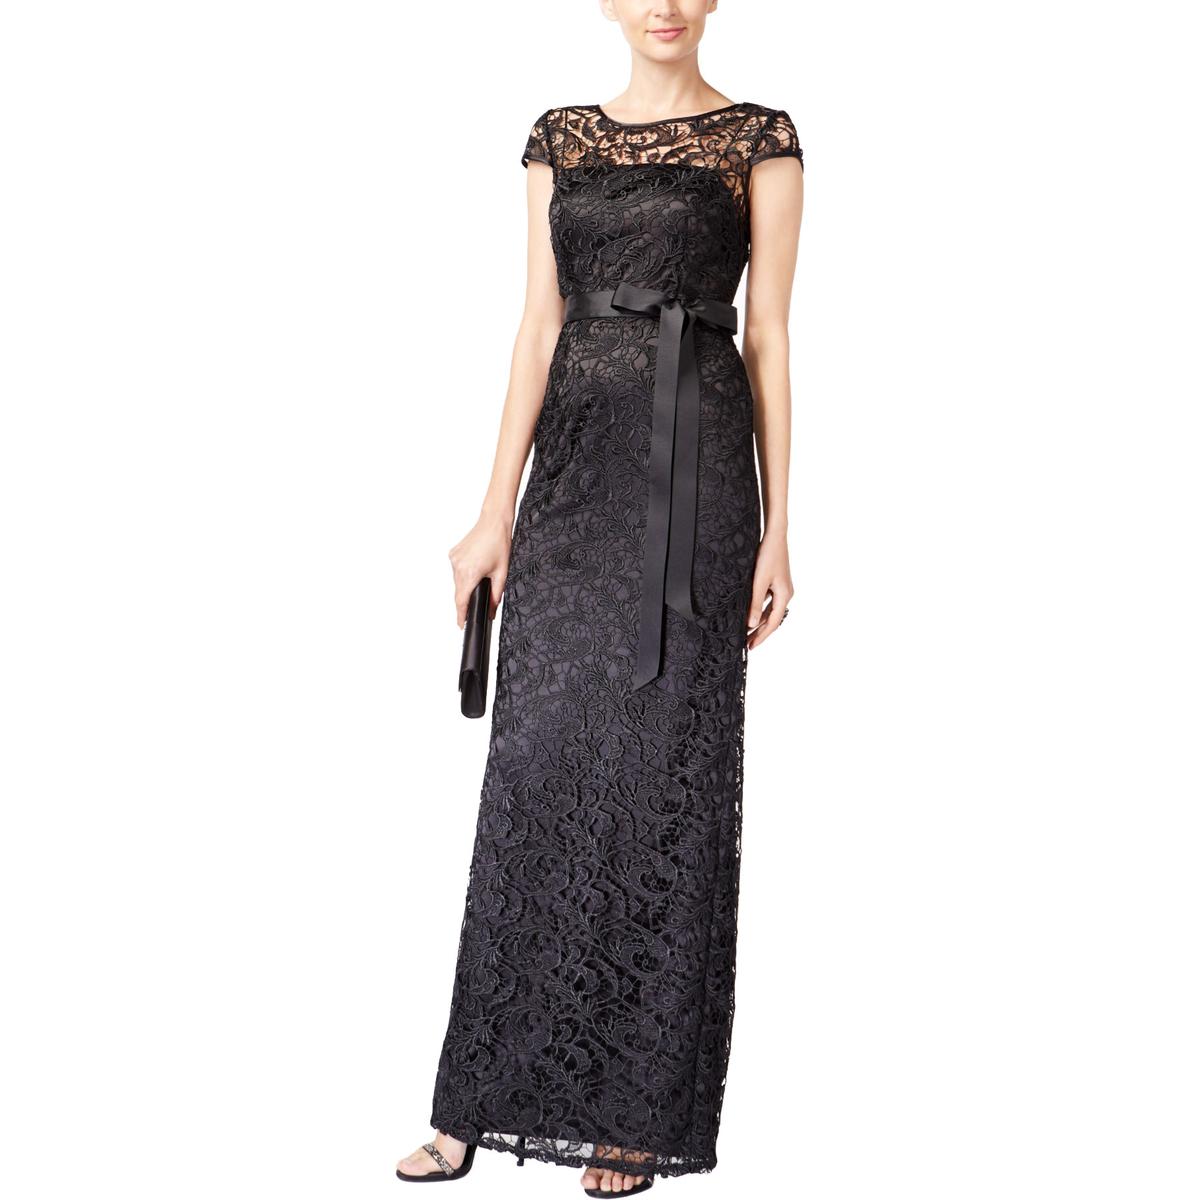 Adrianna Papell Womens Black Lace Lined Evening Dress Gown 2 BHFO 9020 ...